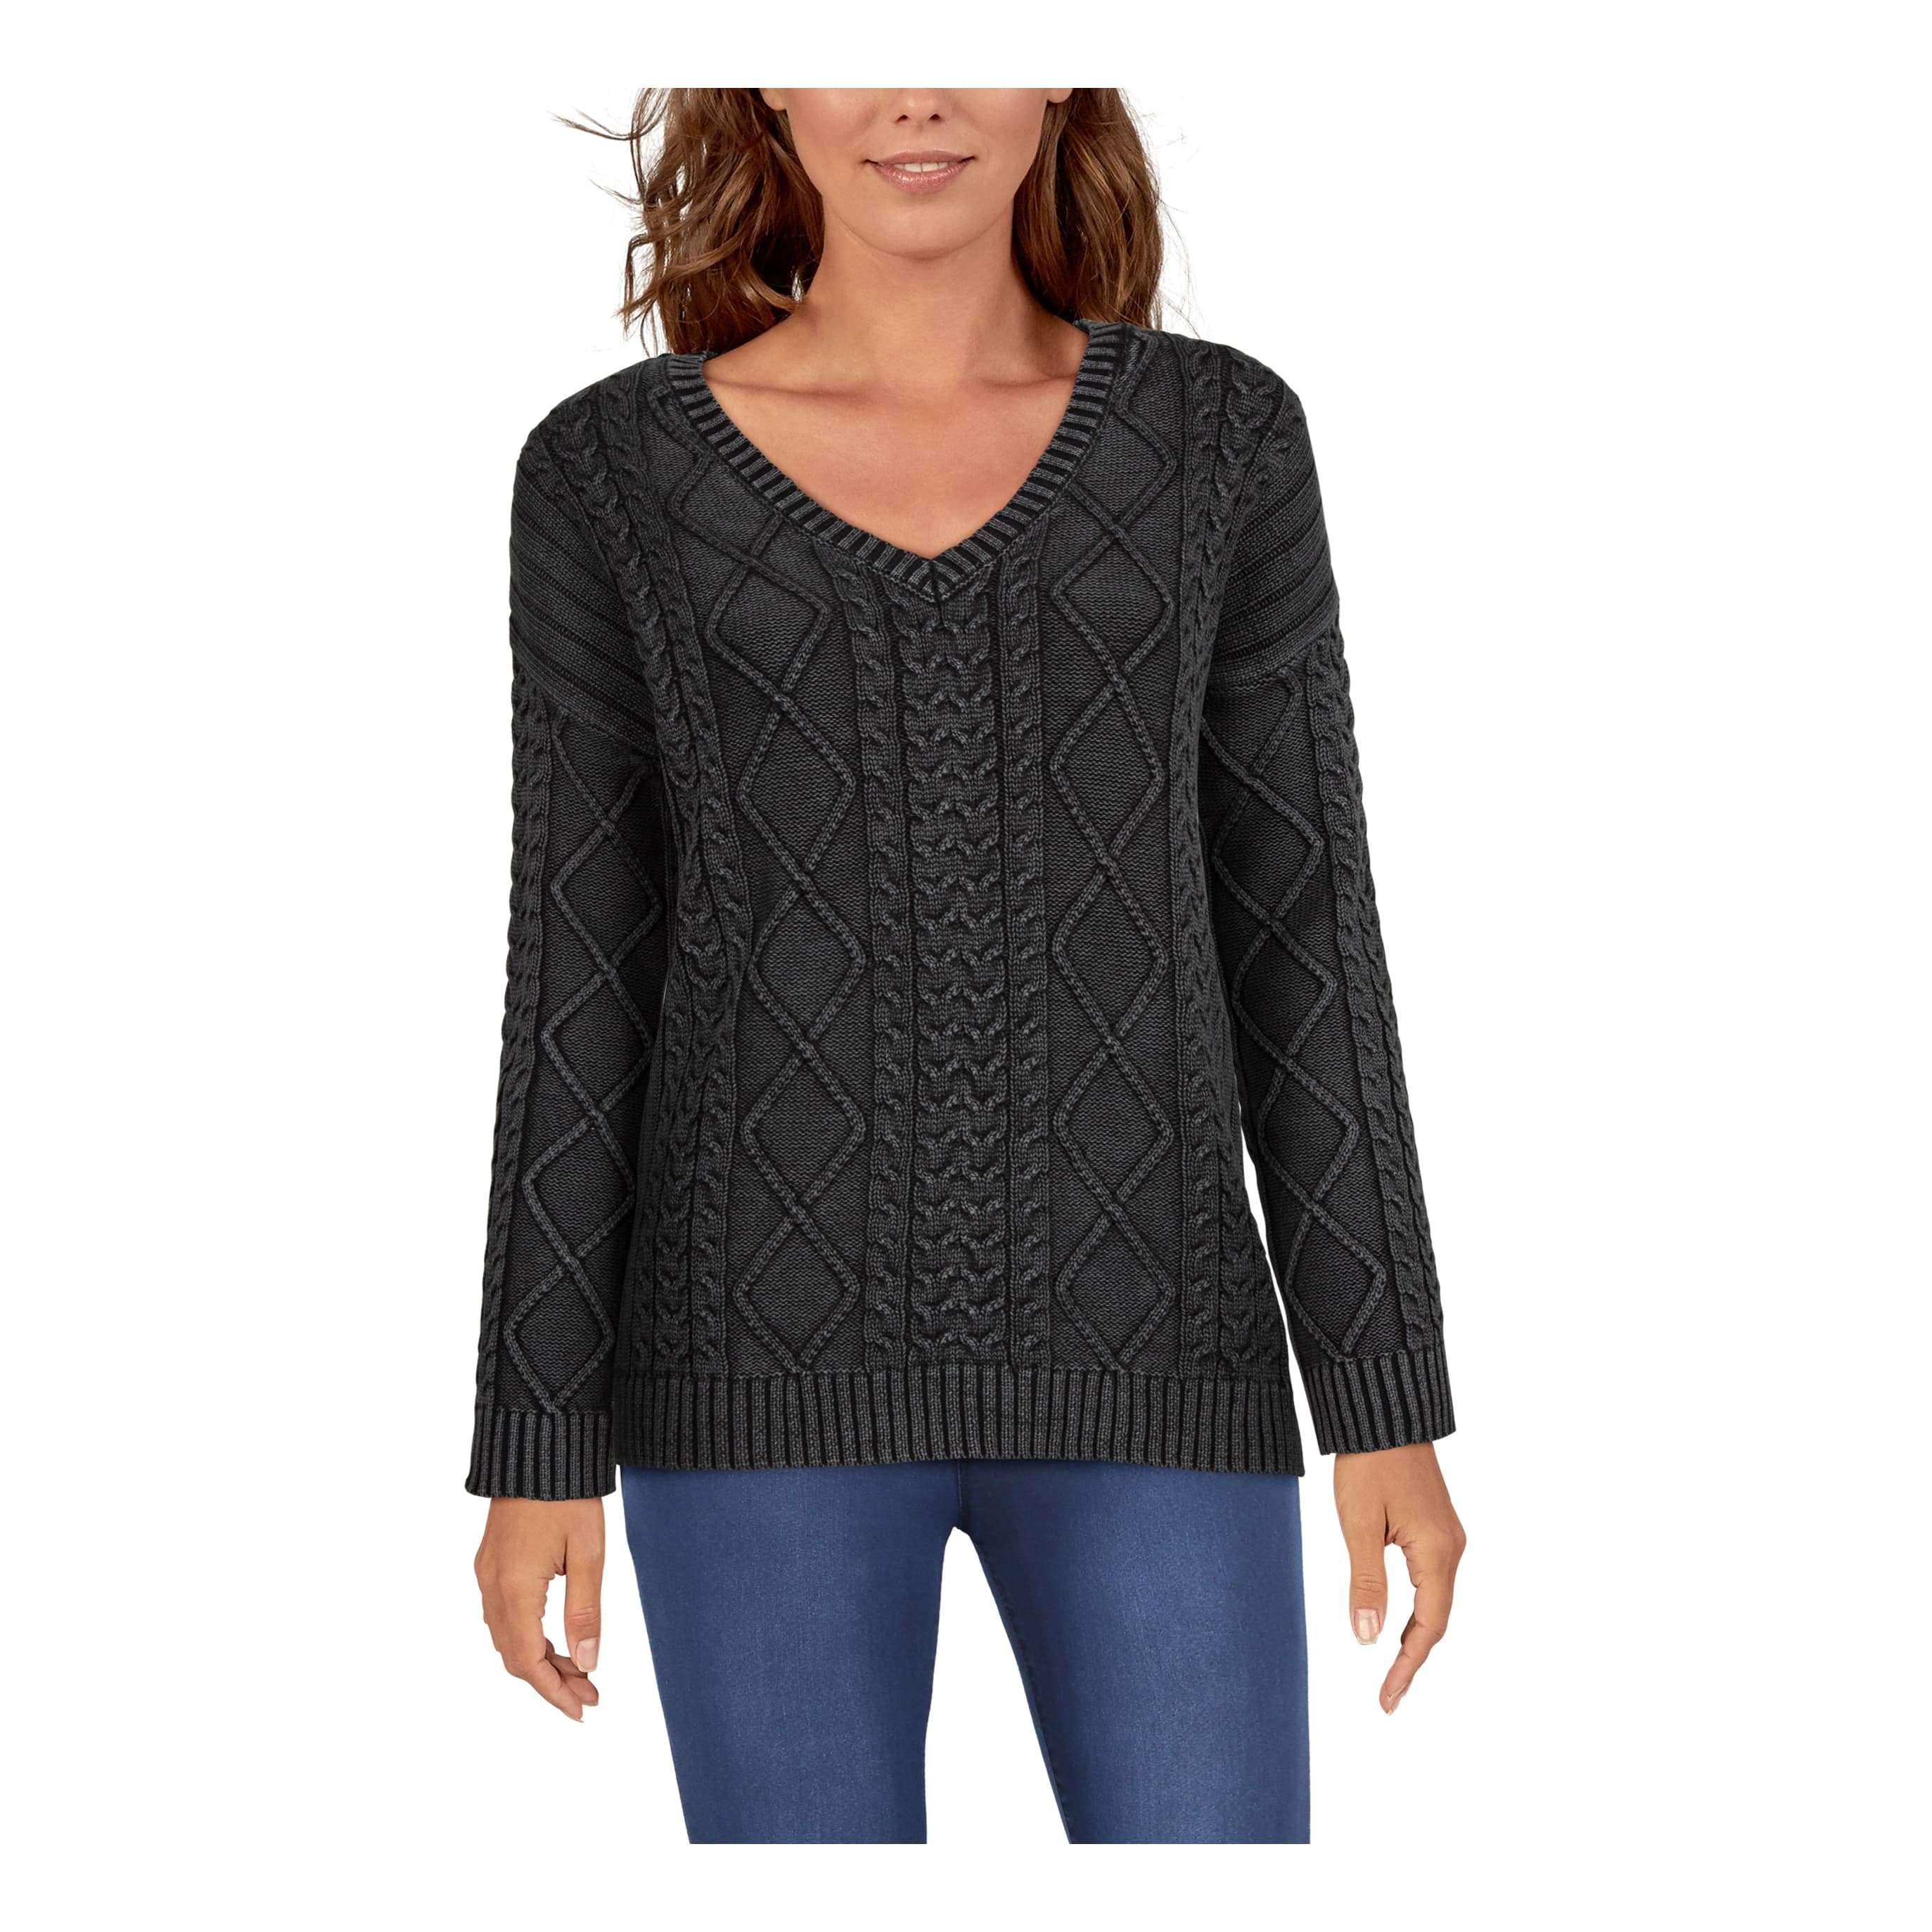 Natural Reflections® Women’s Acid-Wash Cable-Knit Long-Sleeve Sweater - Caviar